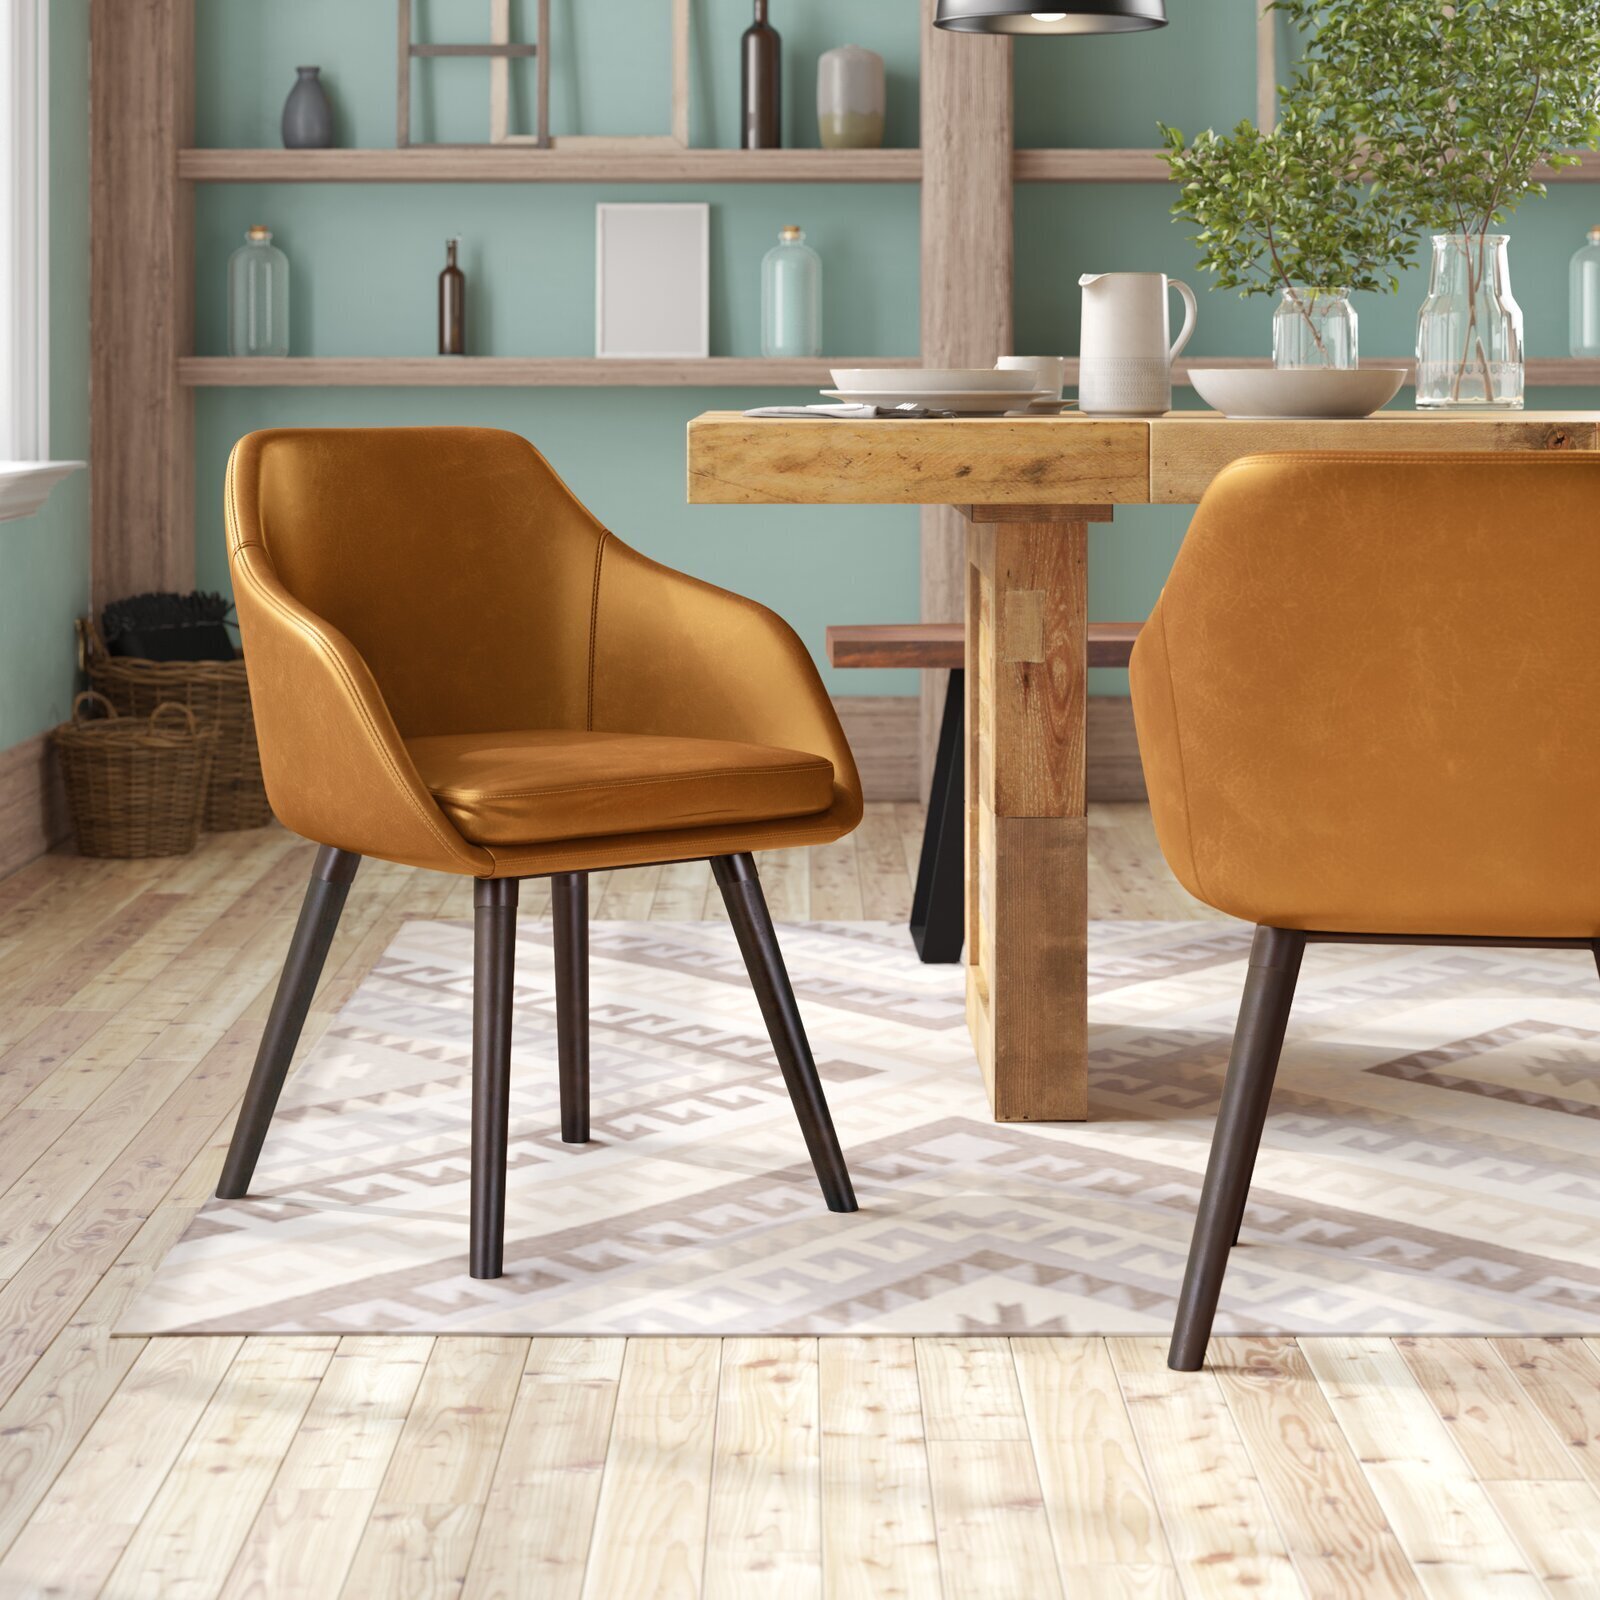 Retro modern captains chairs for dining table 